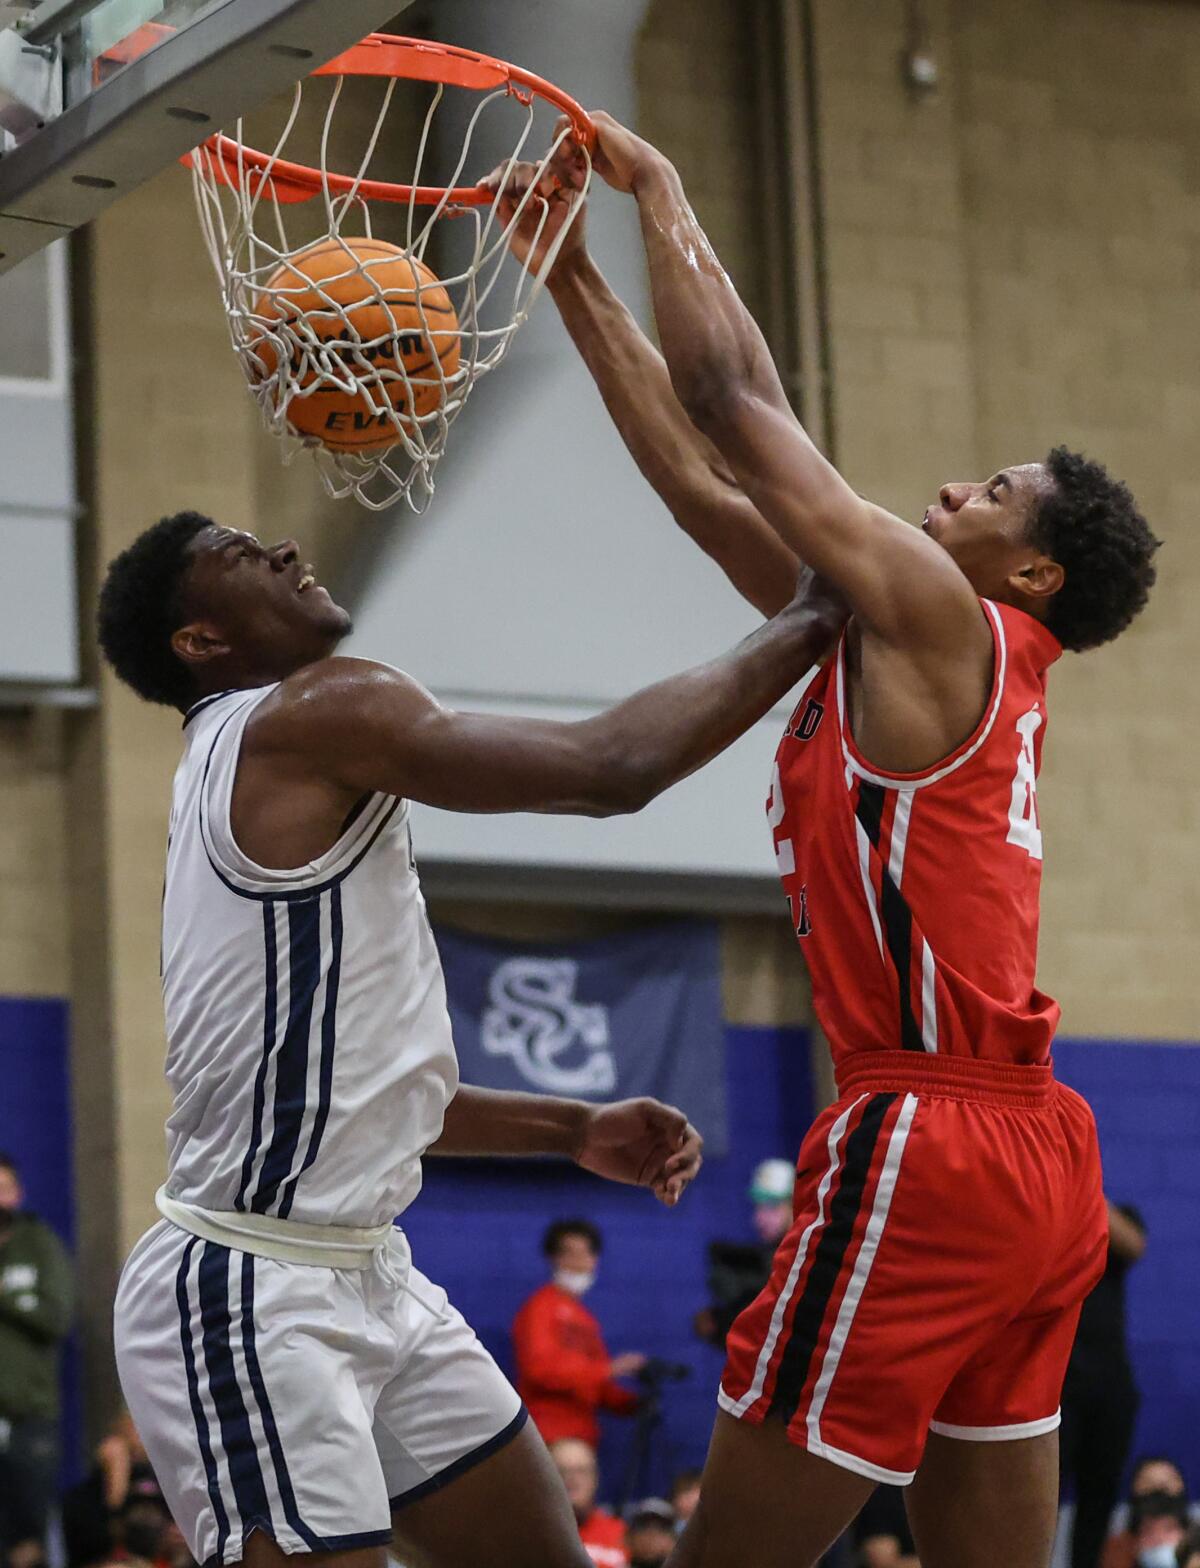 Harvard-Westlake's Landon Lewis, right, dunks over Sierra Canyon's Kijani Wright late in the game.